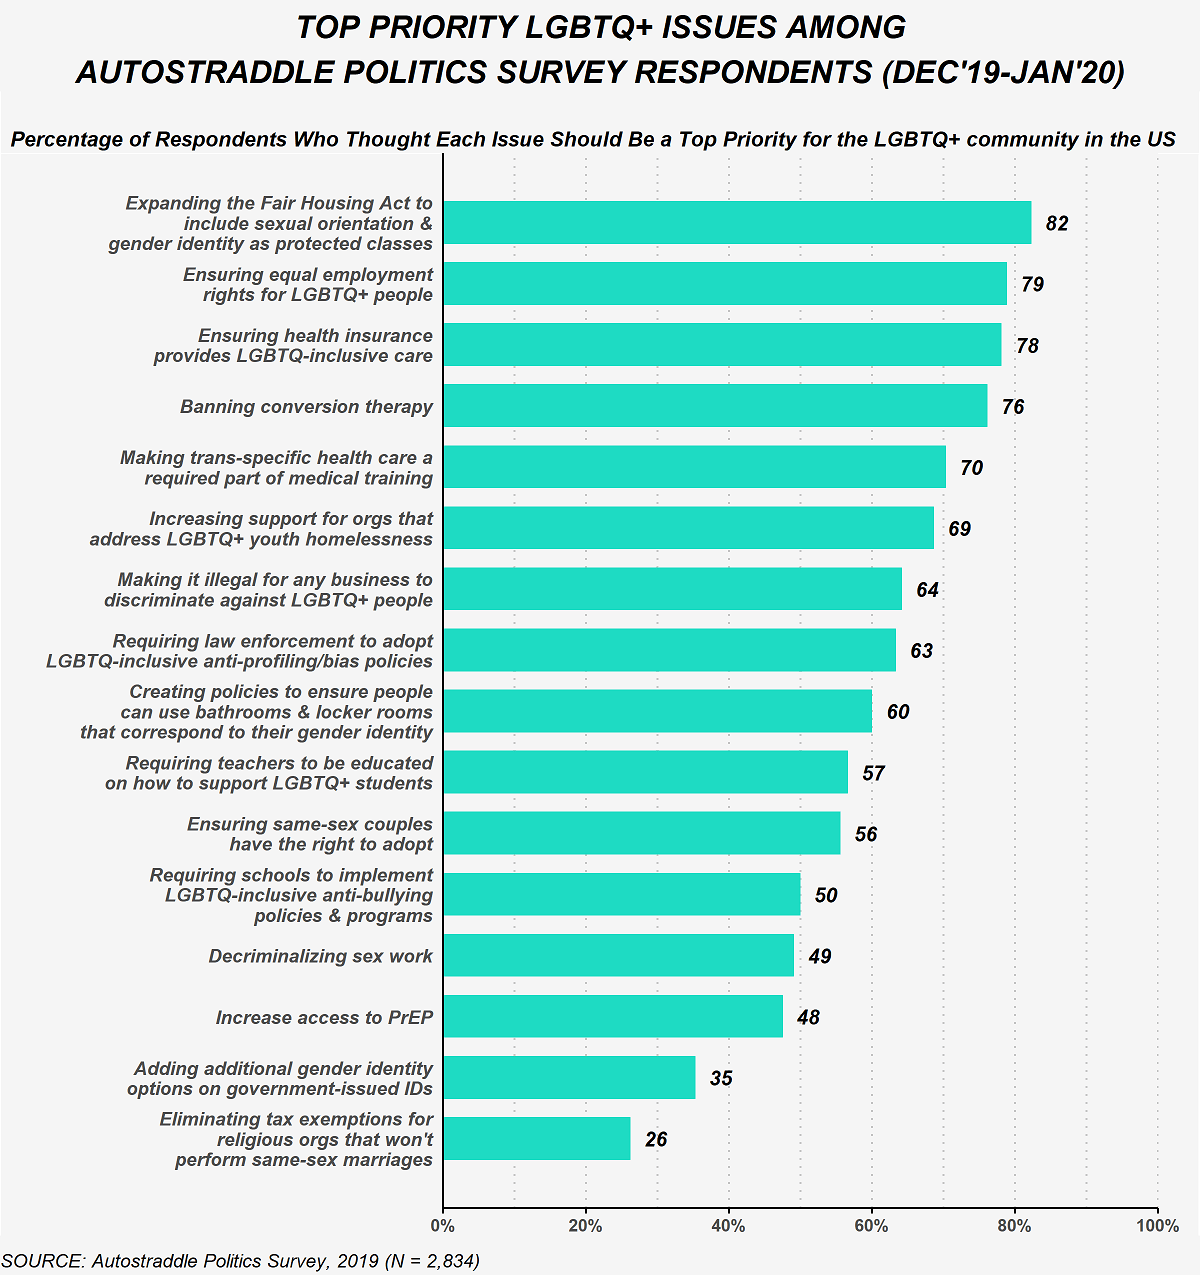 This figure shows the percent of Politics Survey respondents who selected each of the following LGBTQ+ issues as a top priority for the LGBTQ+ community in the U.S. 82% selected expanding the Fair Housing Act to include sexual orientation and gender identity as protected classes as a top priority issue. 79% selected ensuring equal employment rights for LGBTQ+ people as a top priority issue. 78% selected ensuring health insurance provides LGBTQ-inclusive care as a top priority issue. 76% selected banning conversion therapy as a top priority issue. 70% selected making trans-specific health care a required part of medical training as a top priority issue. 69% selected increasing support for organizations that address LGBTQ+ youth homelessness as a top priority issue. 64% selected making it illegal for any business to discriminate against LGBTQ+ people as a top priority issue. 63% selected requiring law enforcement to adopt LGBTQ-inclusive anti-profiling/bias policies as a top priority issue. 60% selected creating policies to ensure people can use bathrooms and locker rooms that correspond to their gender identity as a top priority issue. 57% selected requiring teachers to be educated on how to support LGBTQ+ students as a top priority issue. 56% selected ensuring same-sex couples have the right to adopt as a top priority issue. 50% selected requiring schools to implement LGBTQ-inclusive anit-bullying policies and programs as a top priority issue. 49% selected decriminalizing sex work as a top priority issue. 48% selected increasing access to PrEP as a top priority issue. 35% selected adding additional gender identity options on government-issued IDs as a top priority issue. 26% selected eliminating tax exemptions for religious organizations that won't perform same-sex marriages as a top priority issue.